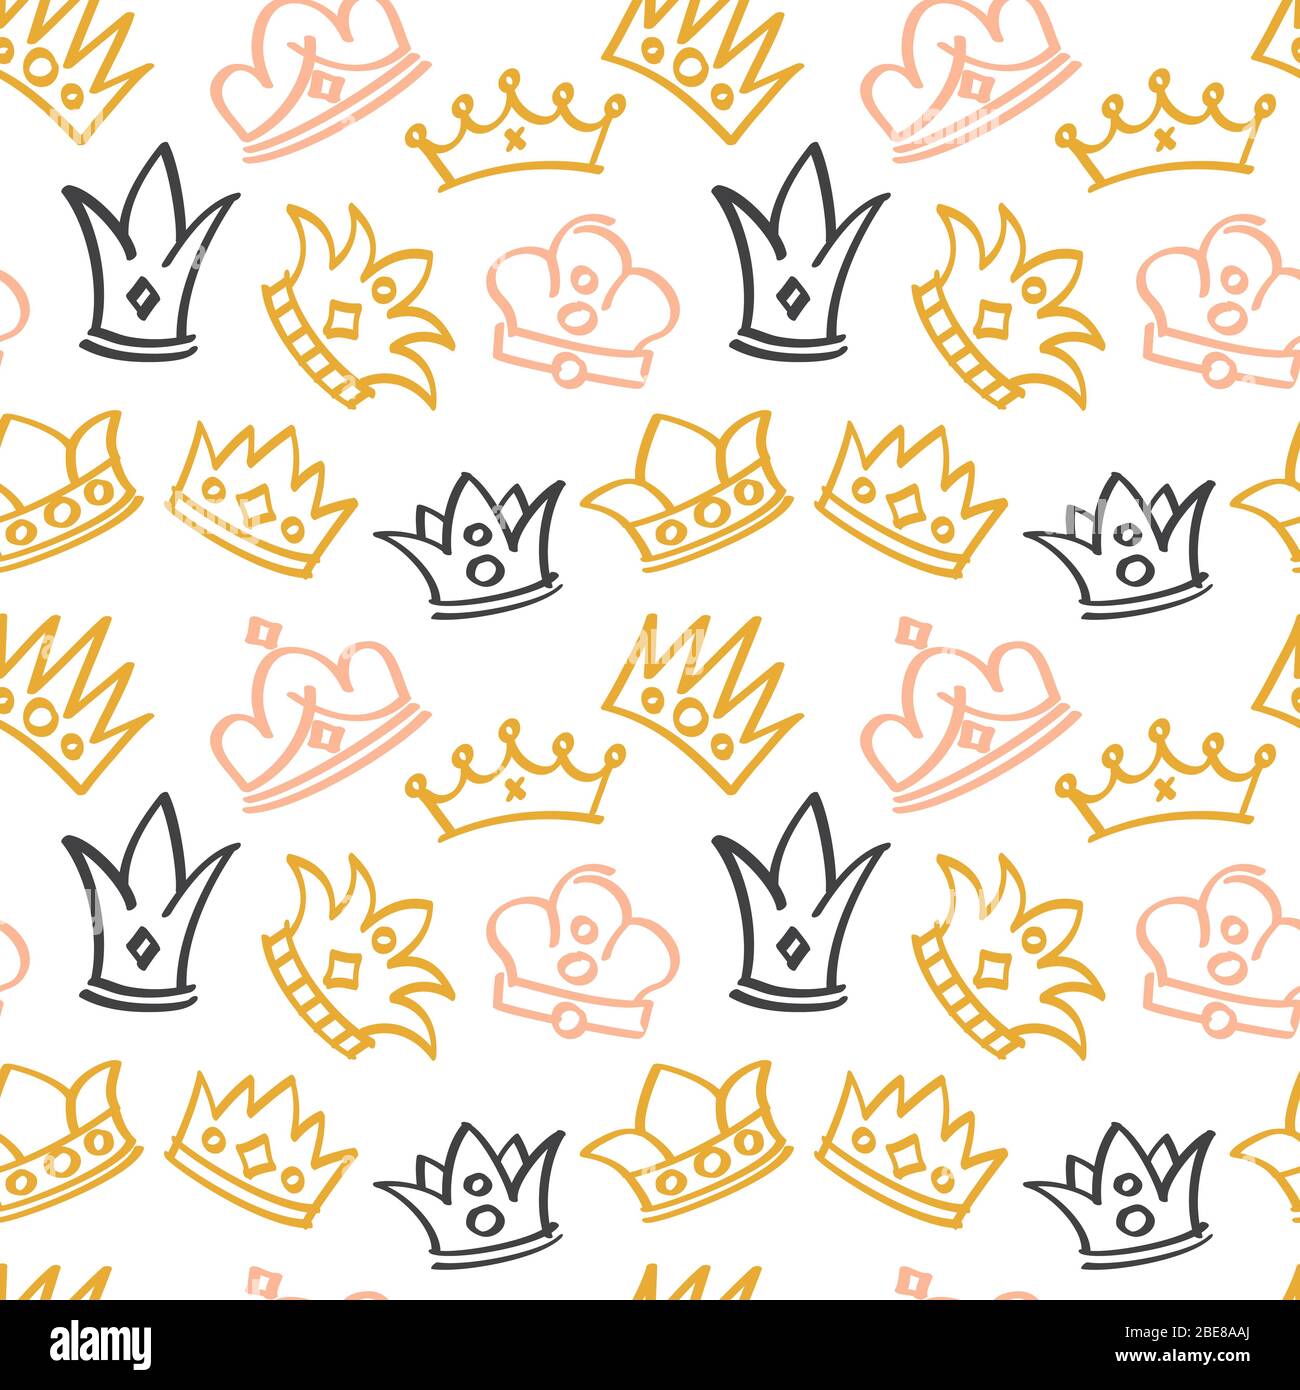 Newborn cute girl vector seamless pattern with doodle crowns. Background with crown doodle illustration Stock Vector